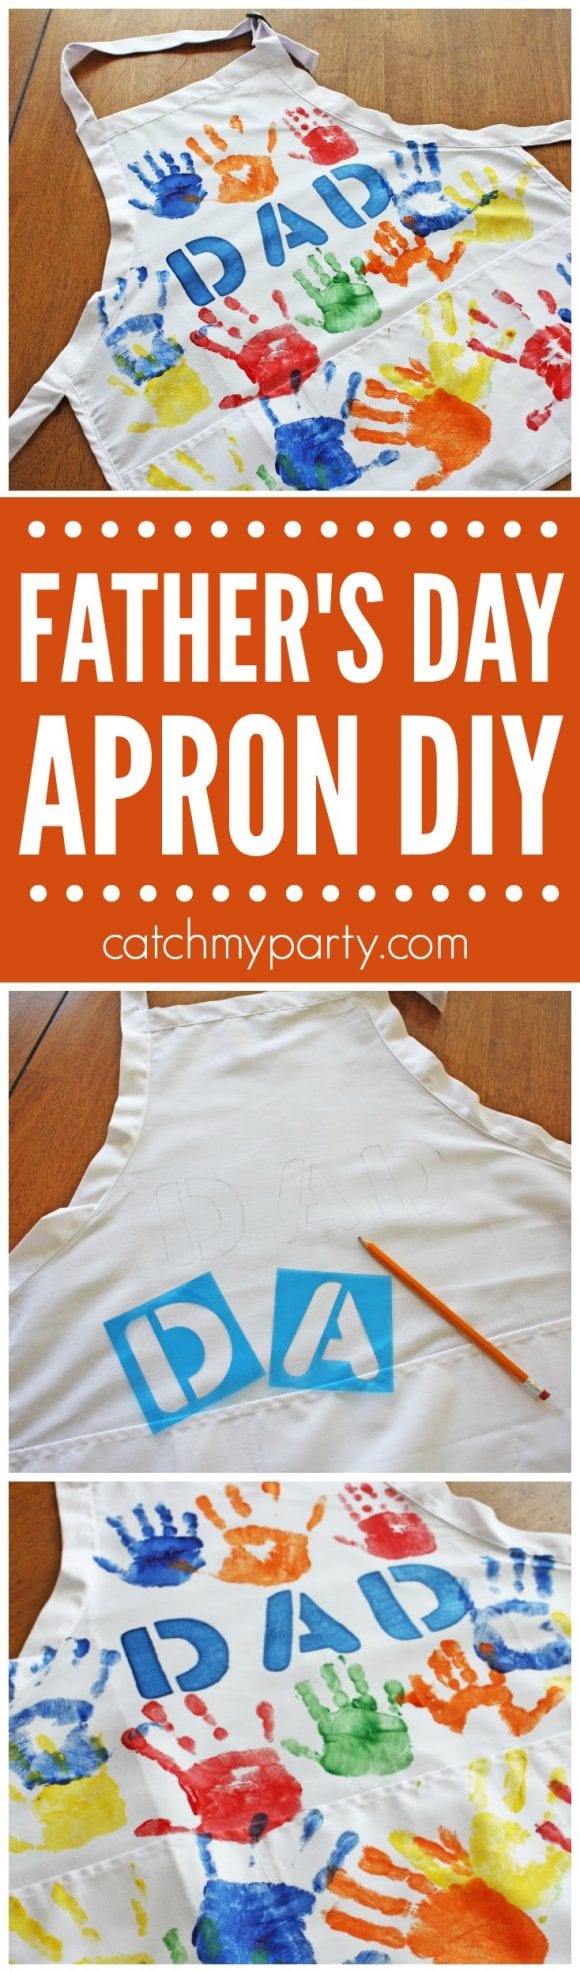 Easy Father's Day Apron DIY | Catchmyparty.com